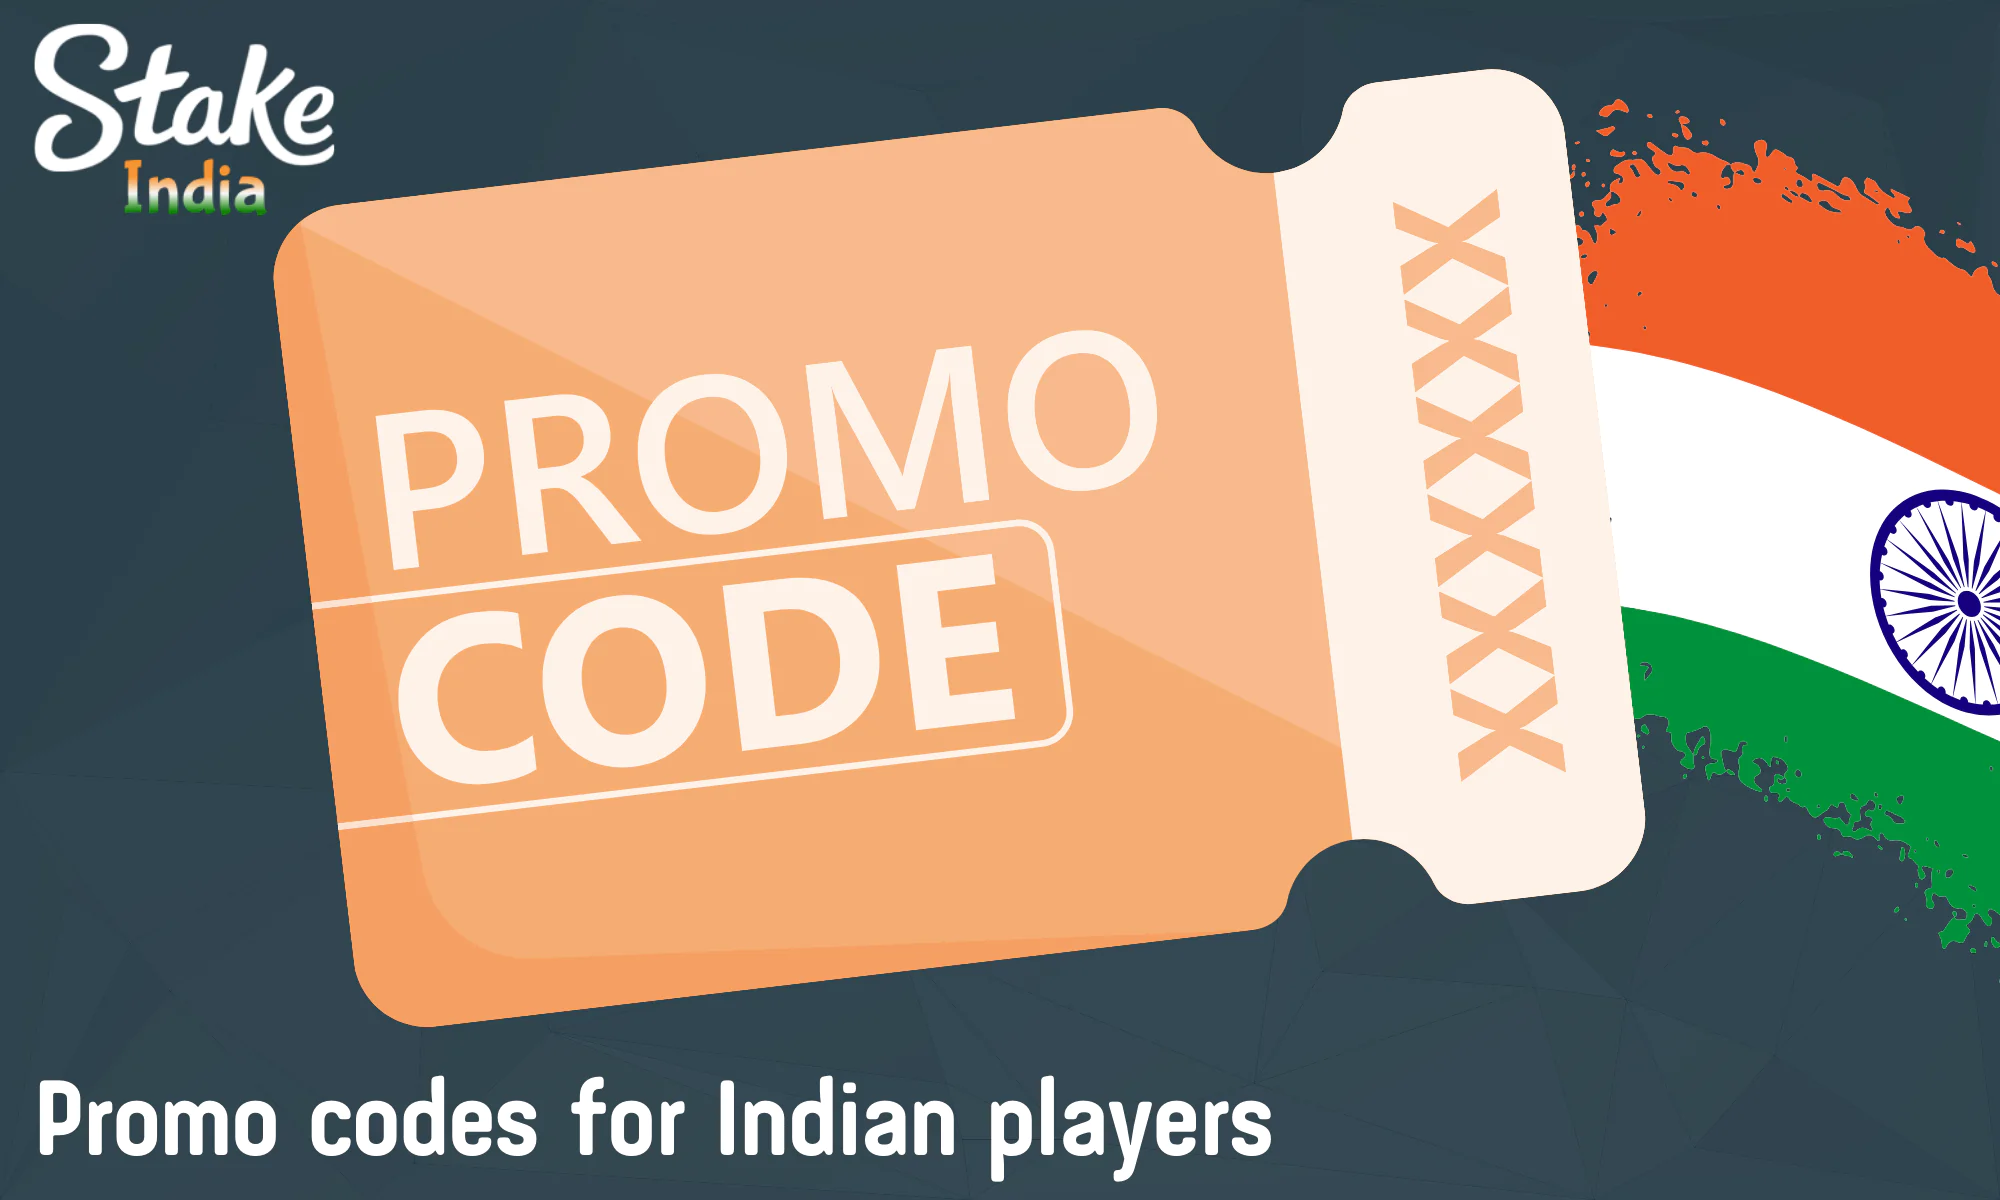 Stake for players from India has special bonus promo codes